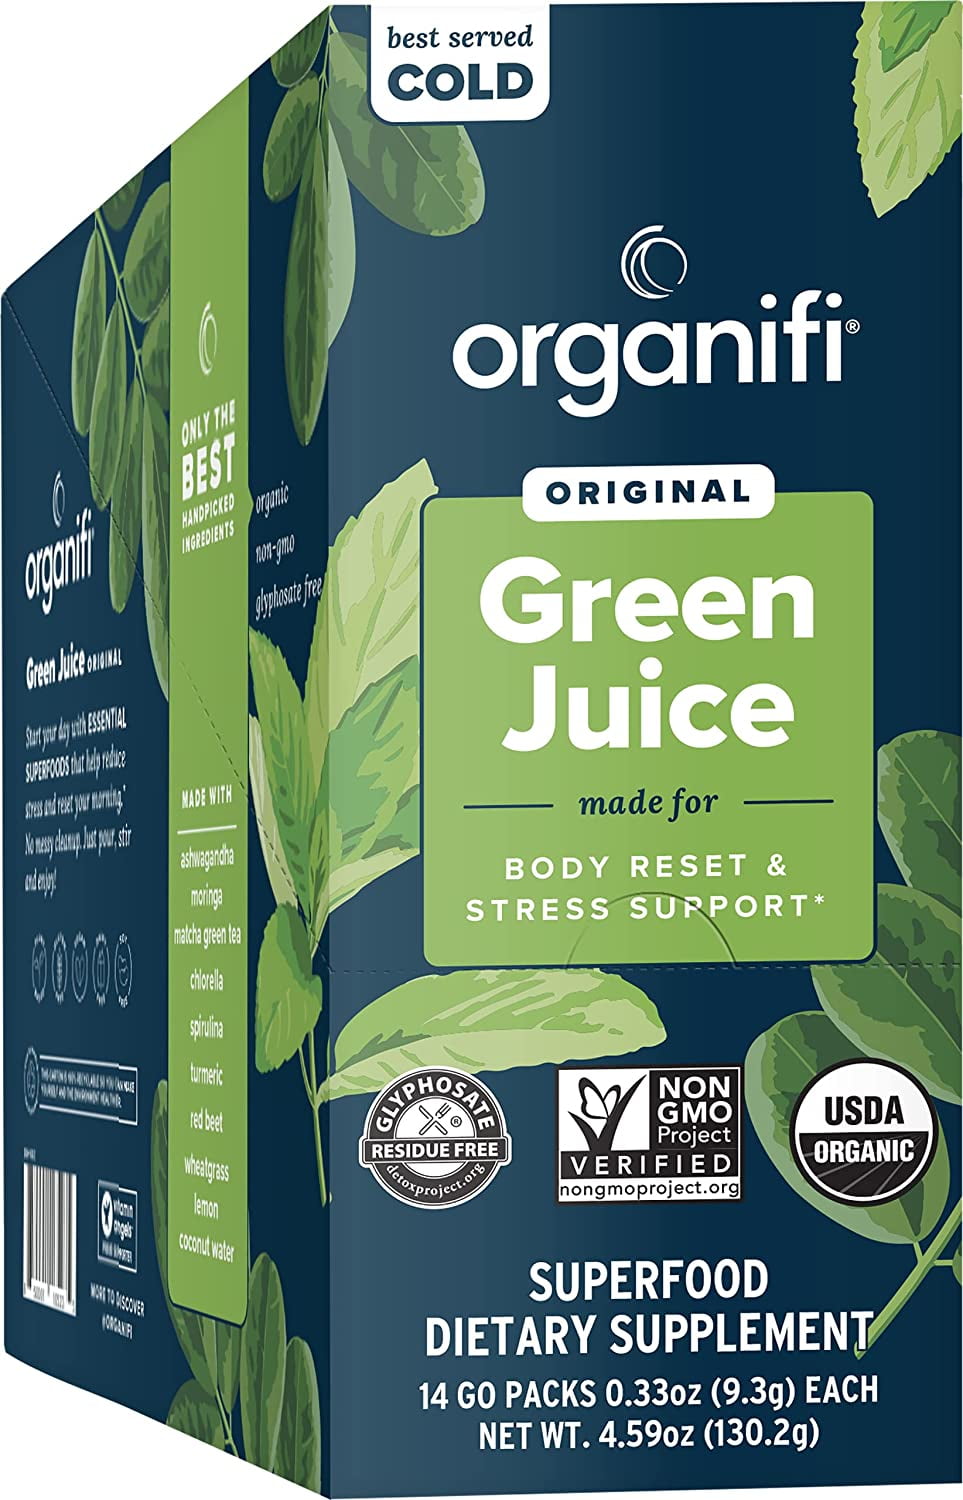 Some Known Questions About Organifi - Joseph Anew.